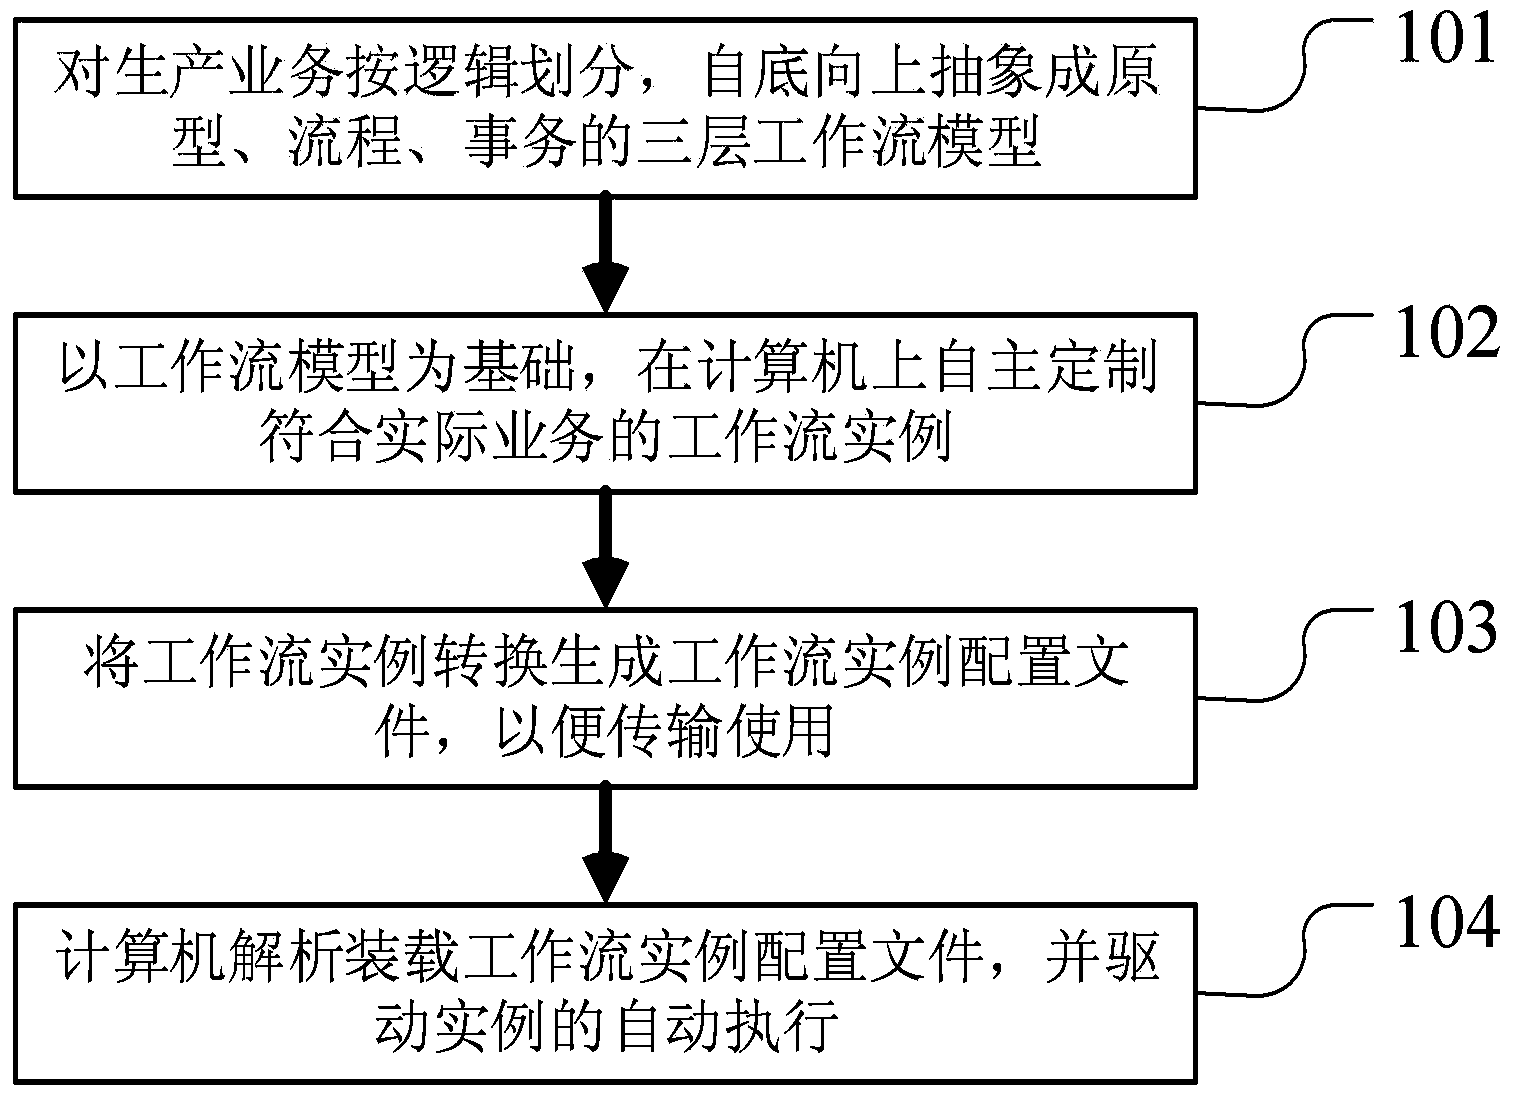 General self-customizing and driven execution method for computer workflow